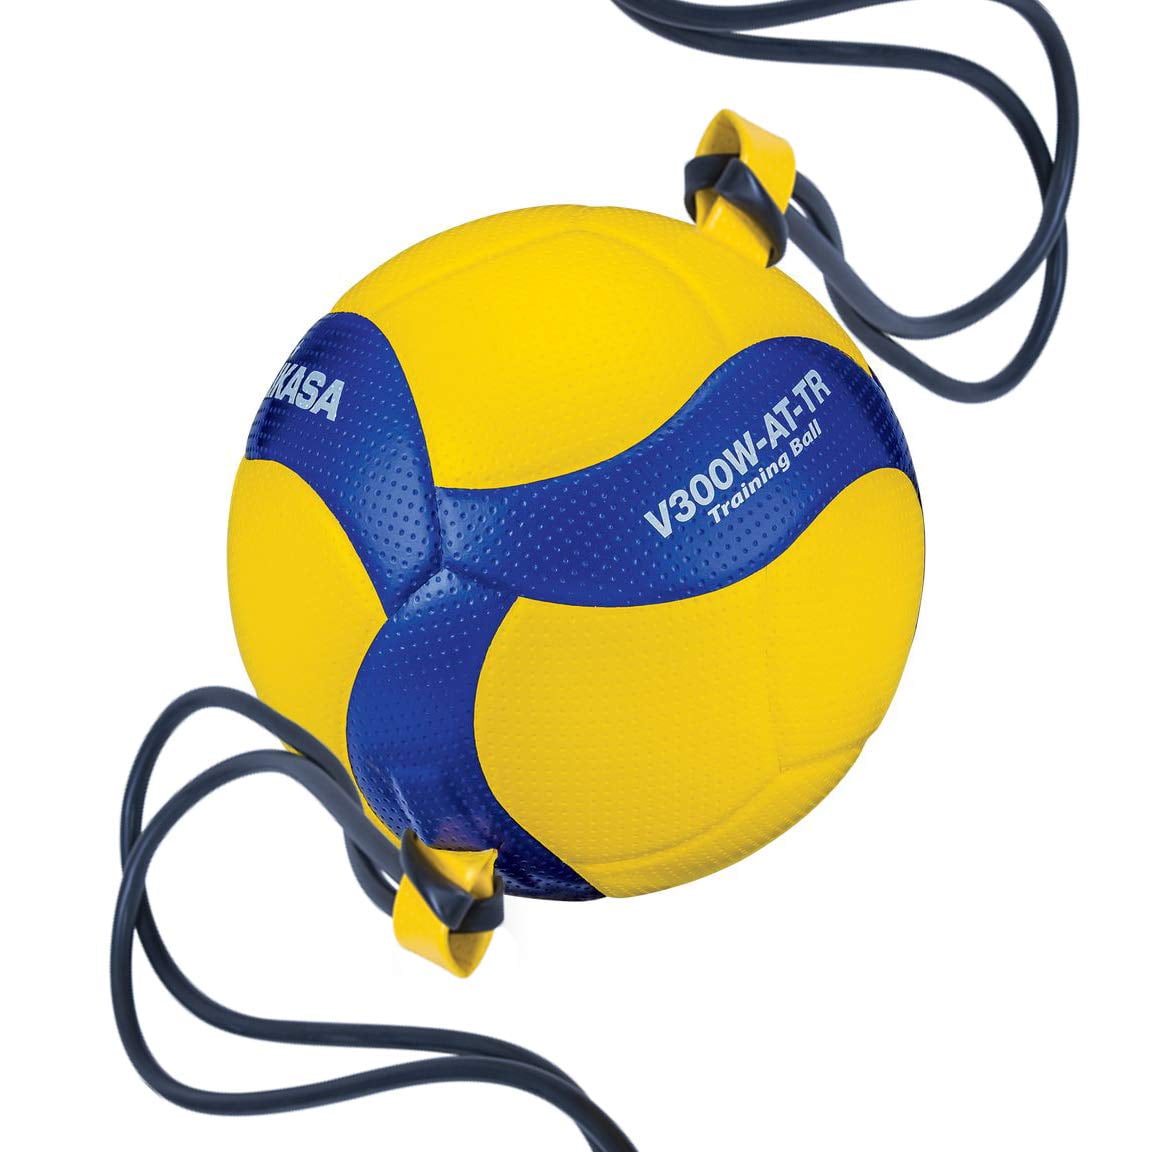 Mikasa Sports V300-AT-TR Official Size tethered Training Volleyball ...